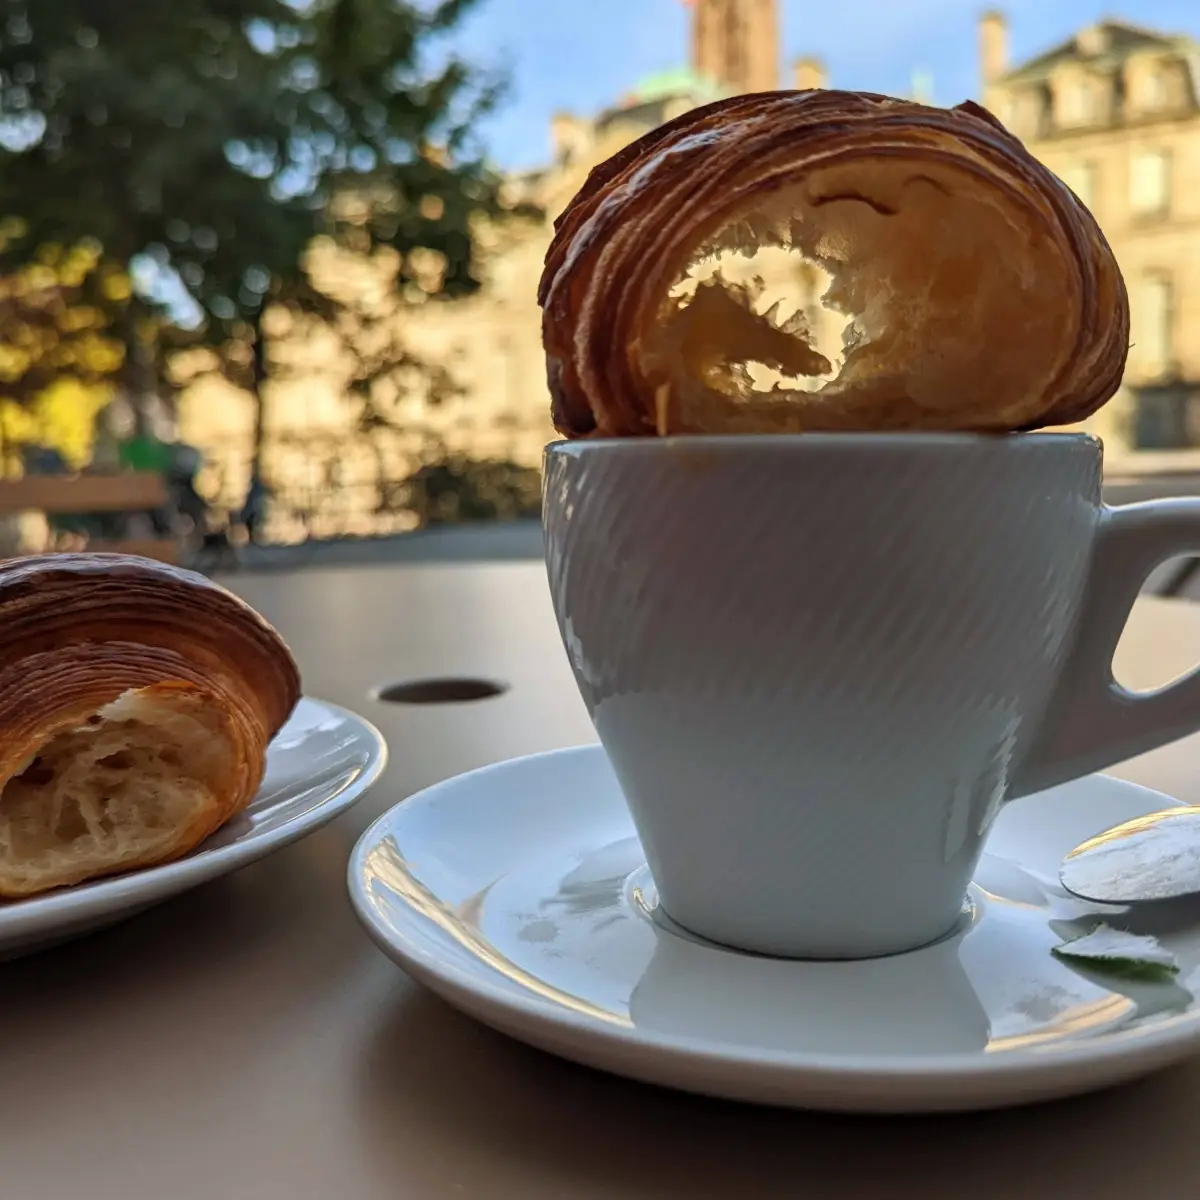 Traditional French Cafe: 7 Places Worth Visiting in Strasbourg